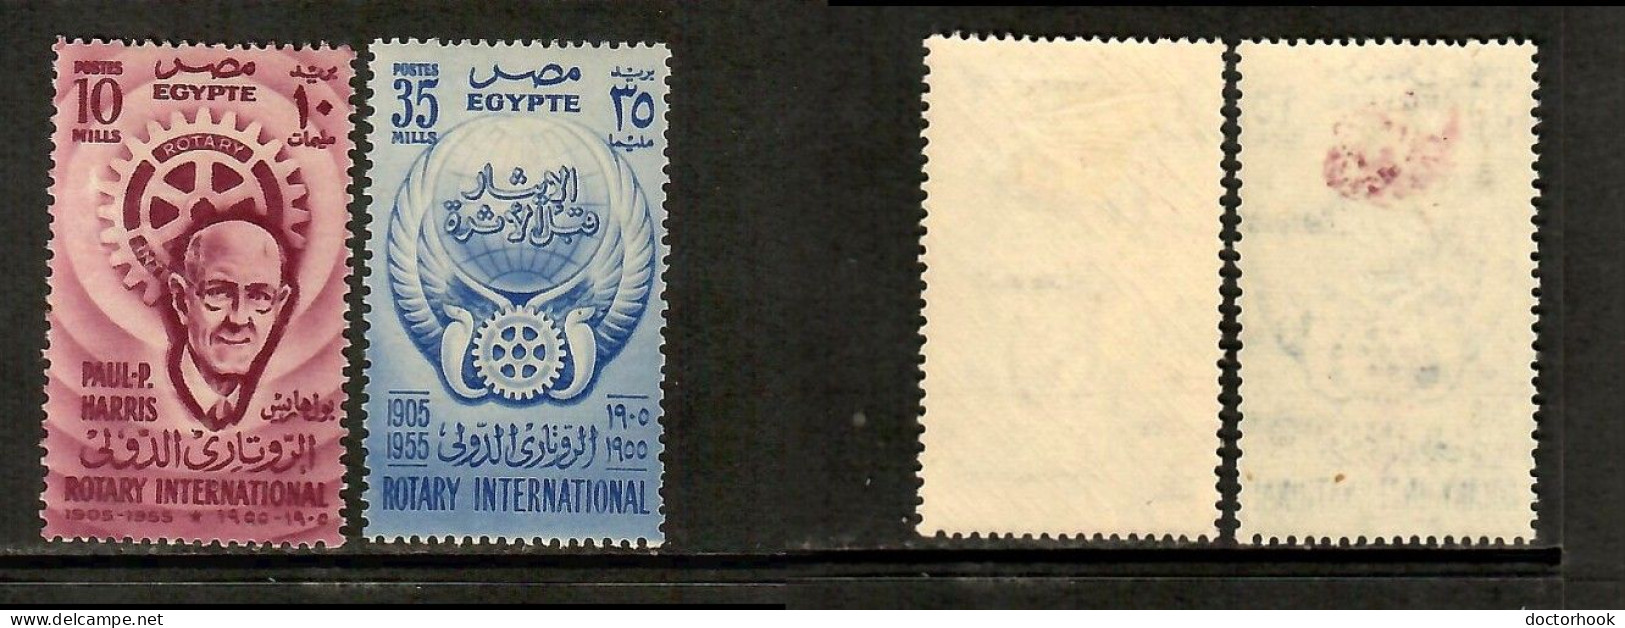 EGYPT    Scott # 378-9* MINT LH (CONDITION PER SCAN) (Stamp Scan # 1038-8) - Unused Stamps